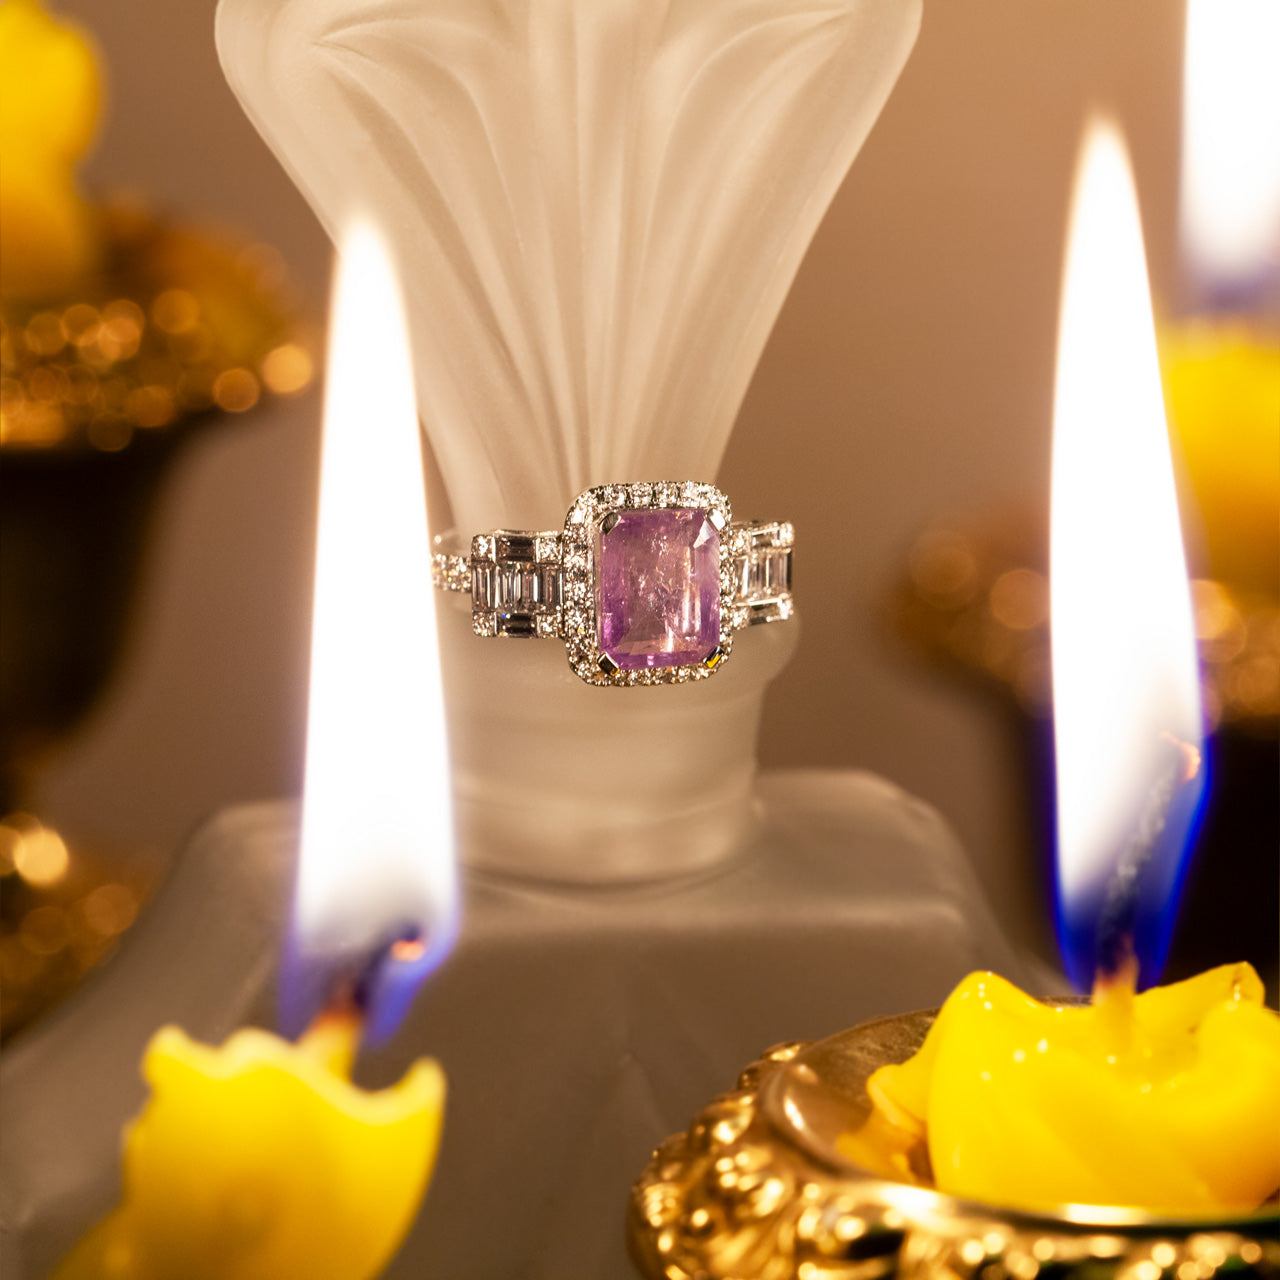 The 2.23ct natural alexandrite ring with diamond accents on 18k white gold resting atop a candle arrangement